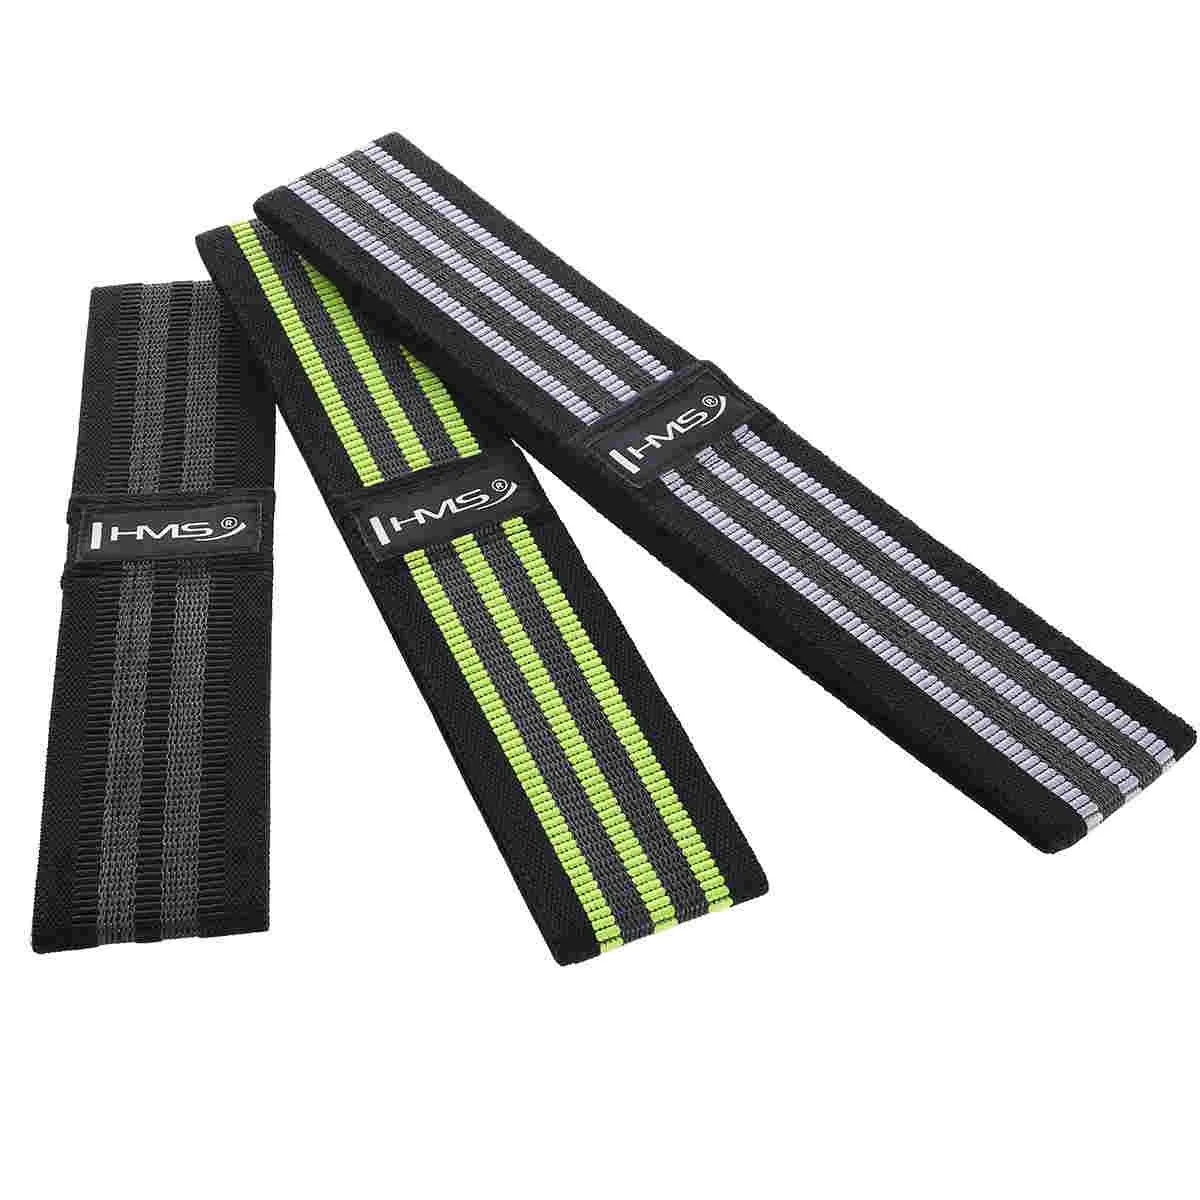 HIP Bands 3-IN1 Set | Fitness Band Resistance Band